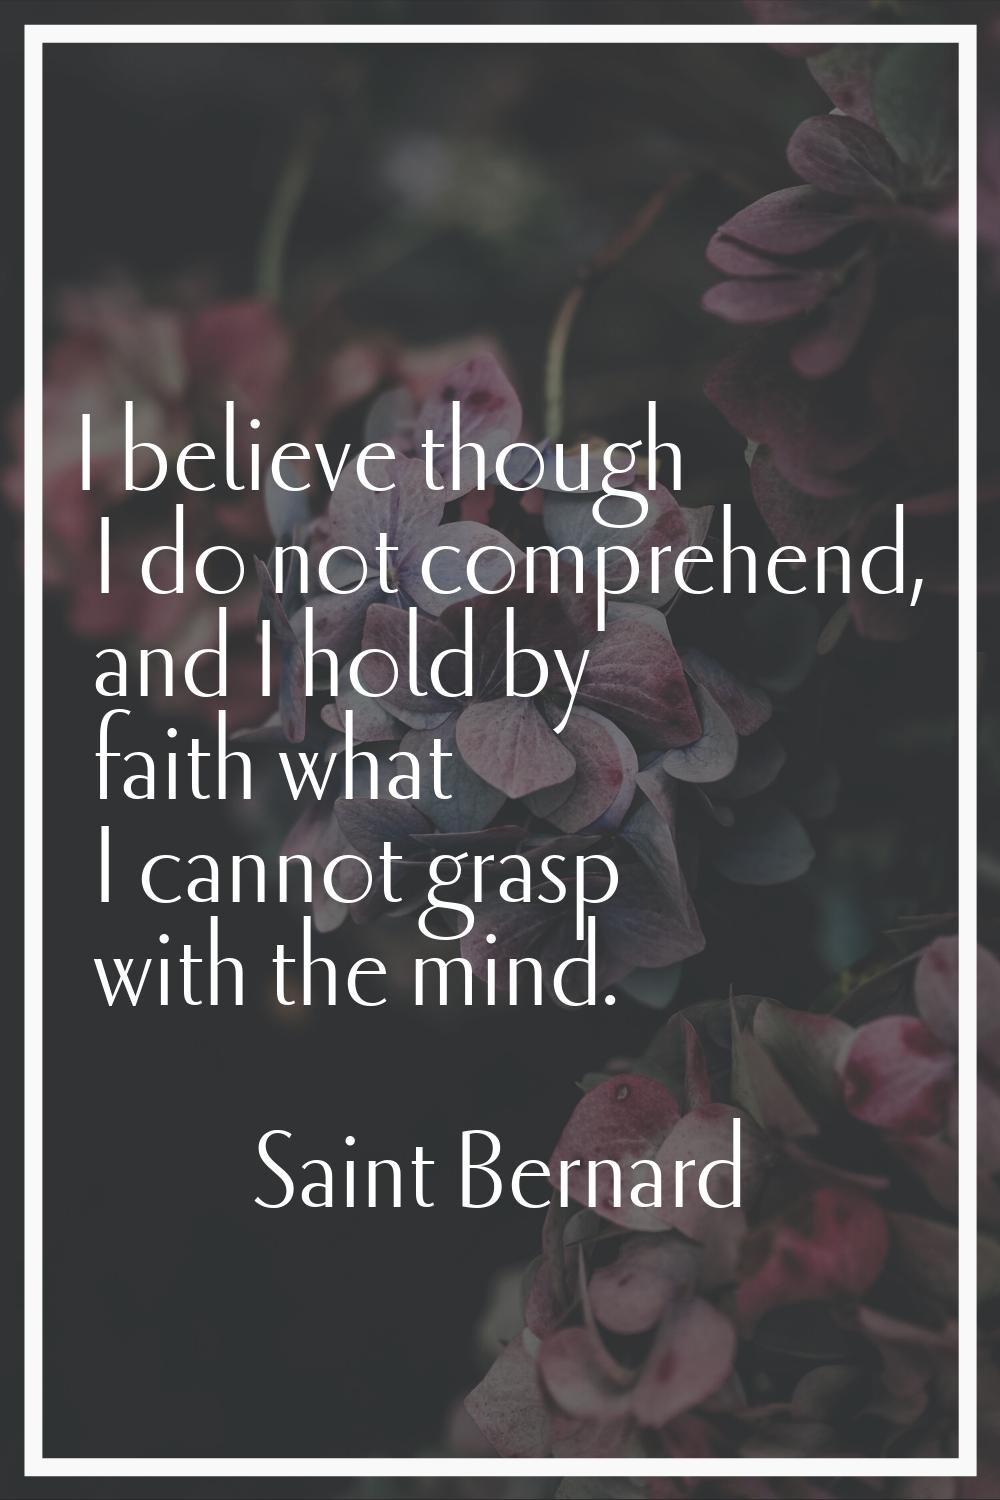 I believe though I do not comprehend, and I hold by faith what I cannot grasp with the mind.